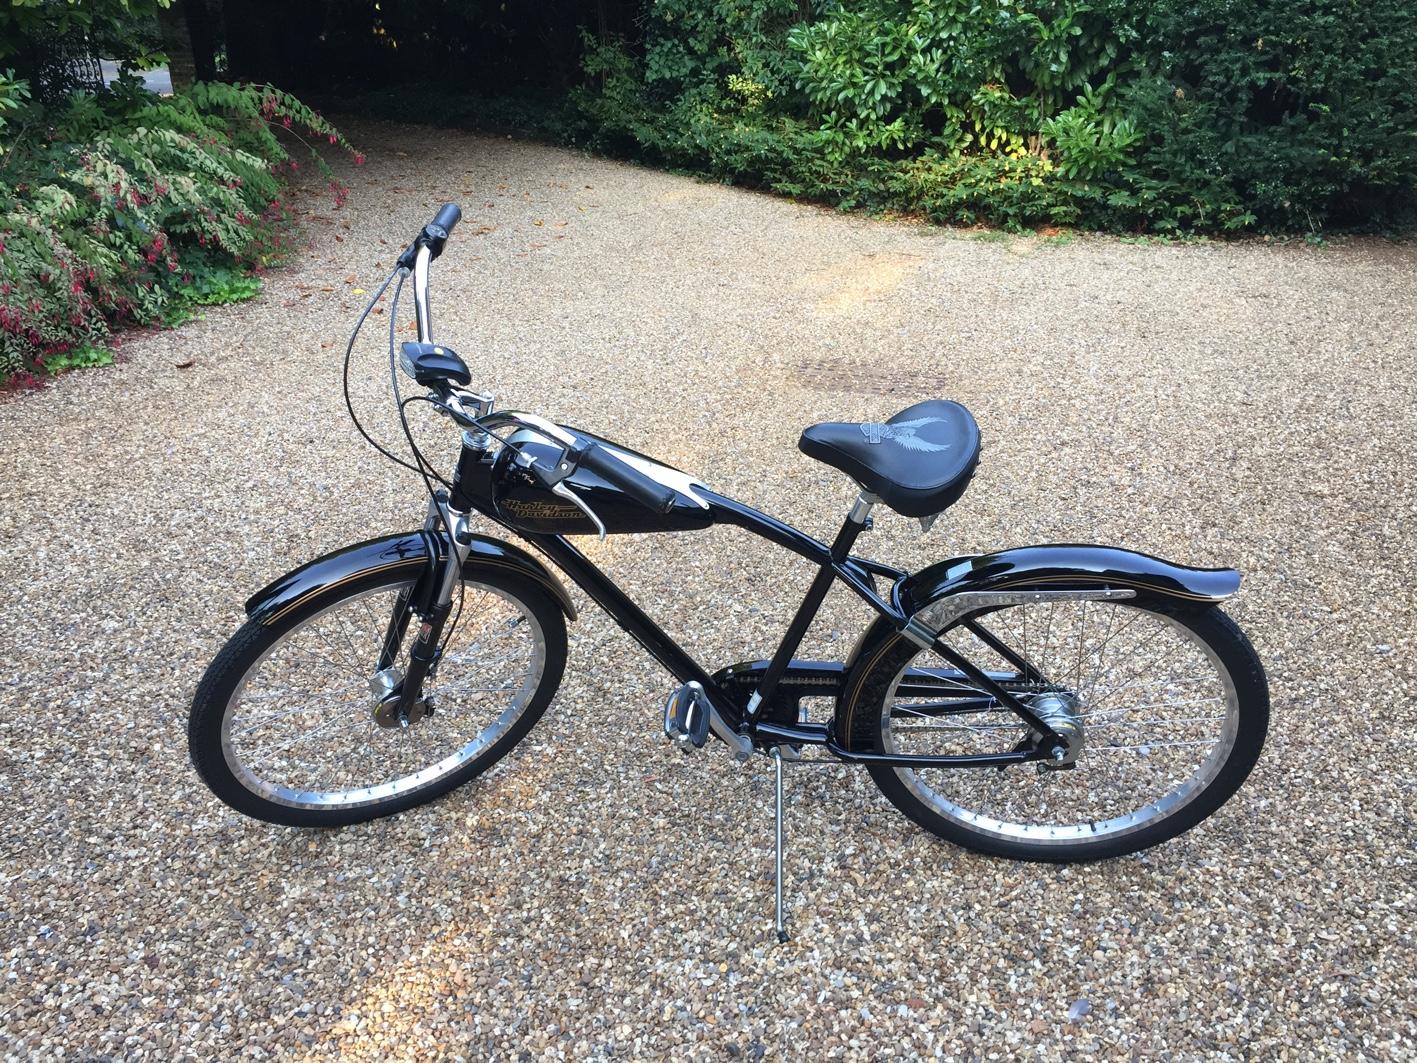 A rare example of the limited edition Harley Davidson Velo Glide in black.
Made by GT Bicycles for the 95th Anniversary of Harley Davidson.
The Velo Glide is built on a chrome-moly steel frame. The backbone between the seat and steering head is